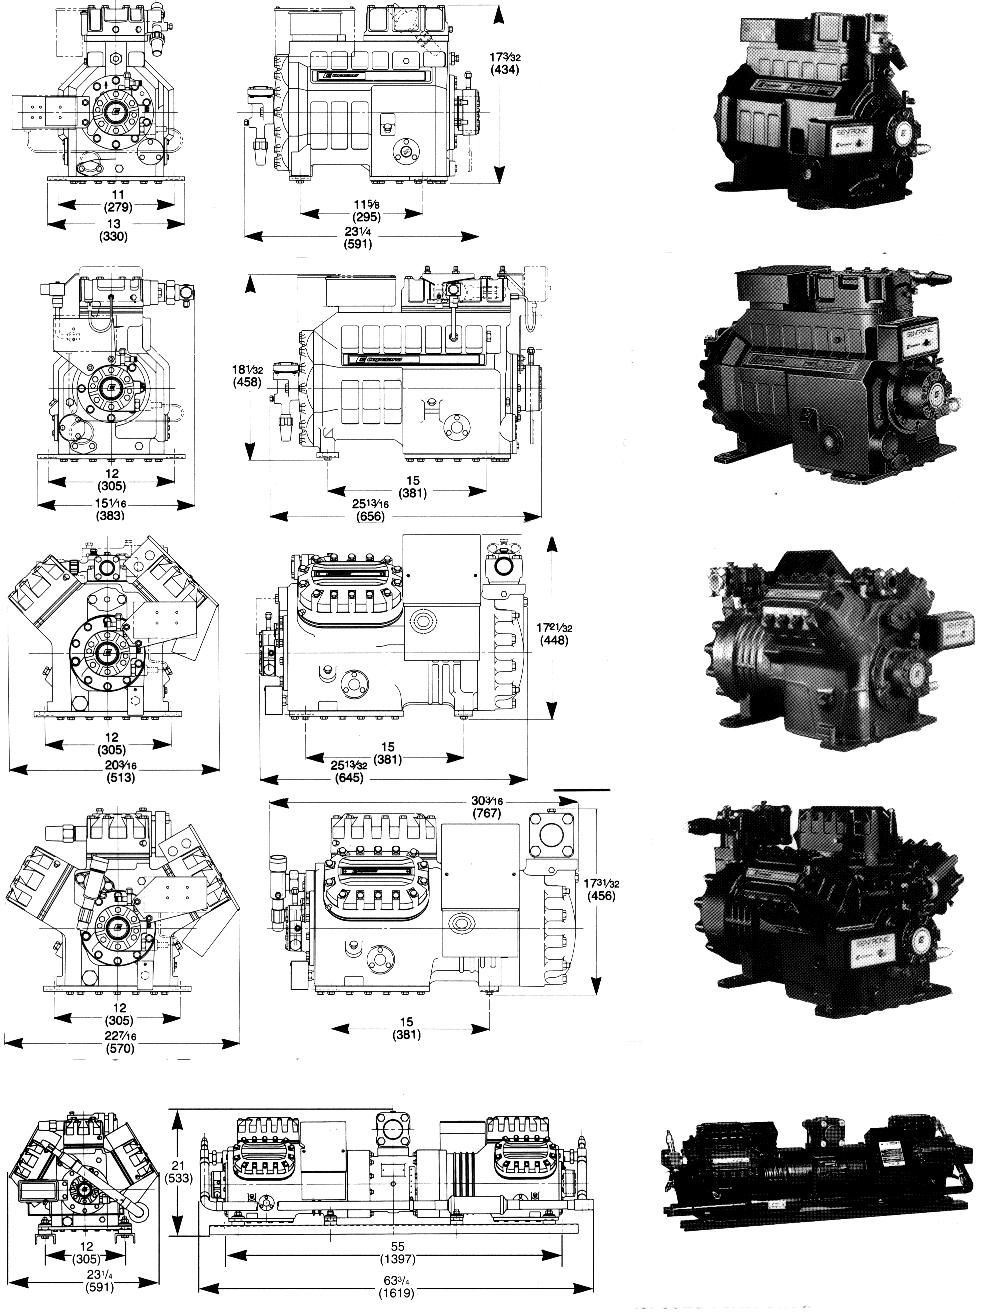 HFC COPELAND DISCUS COMPRESSORS DIMENSIONS AND PHOTOGRAPHS D F A M I L Y Model DC3-050E Shown 3D F A M I L Y Model 3DB3A075E Shown 4D F A M I L